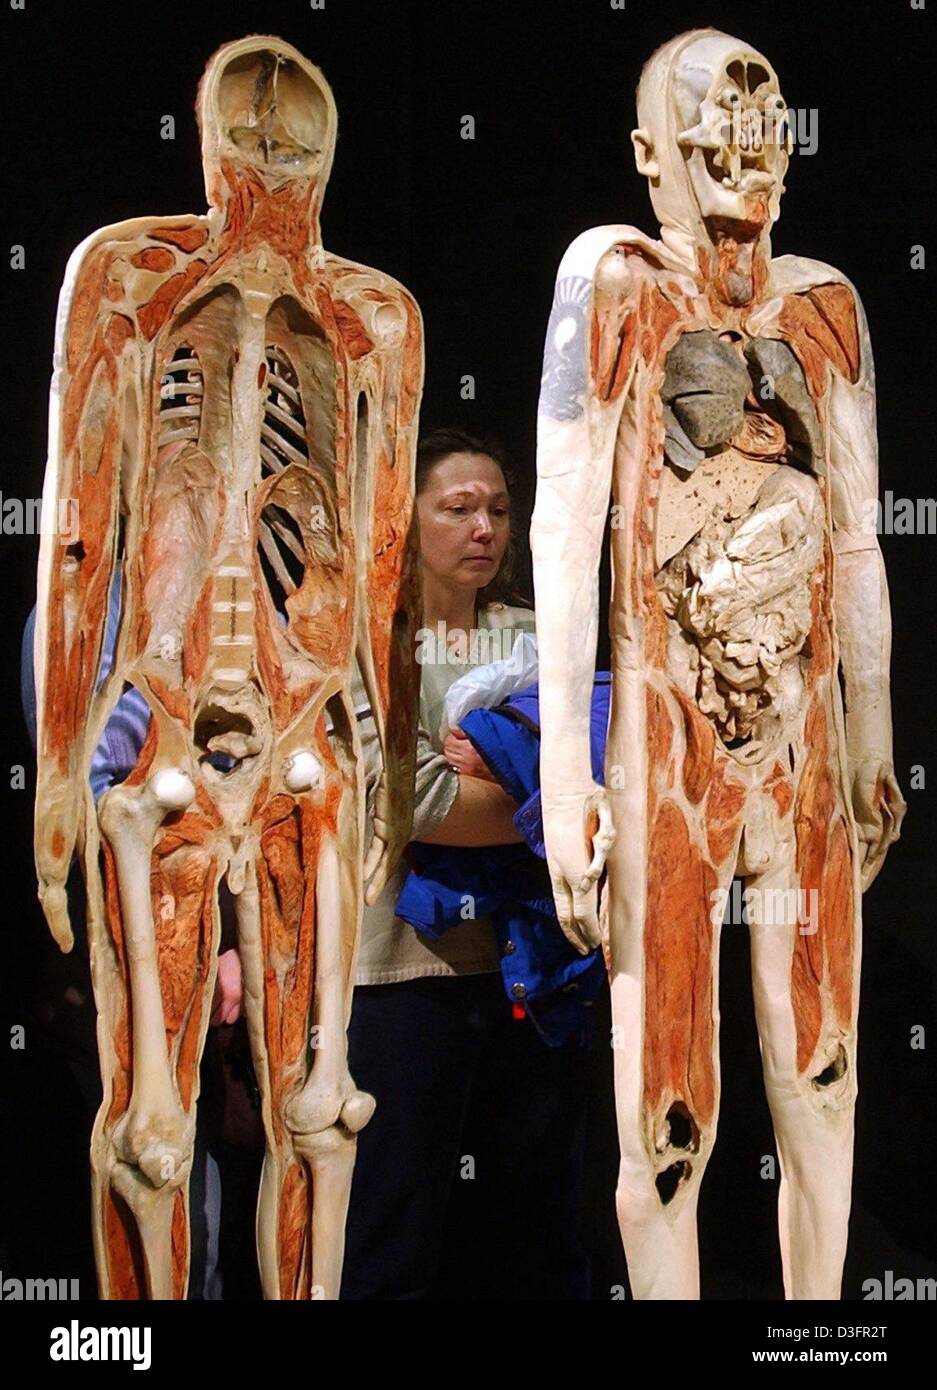 dpa) - A visitor looks at an exhibit at the Body World exhibition in  Munich, Germany, 23 February 2003. After weeks of debates the Bavarian  administrative court approved on 21 February 2003